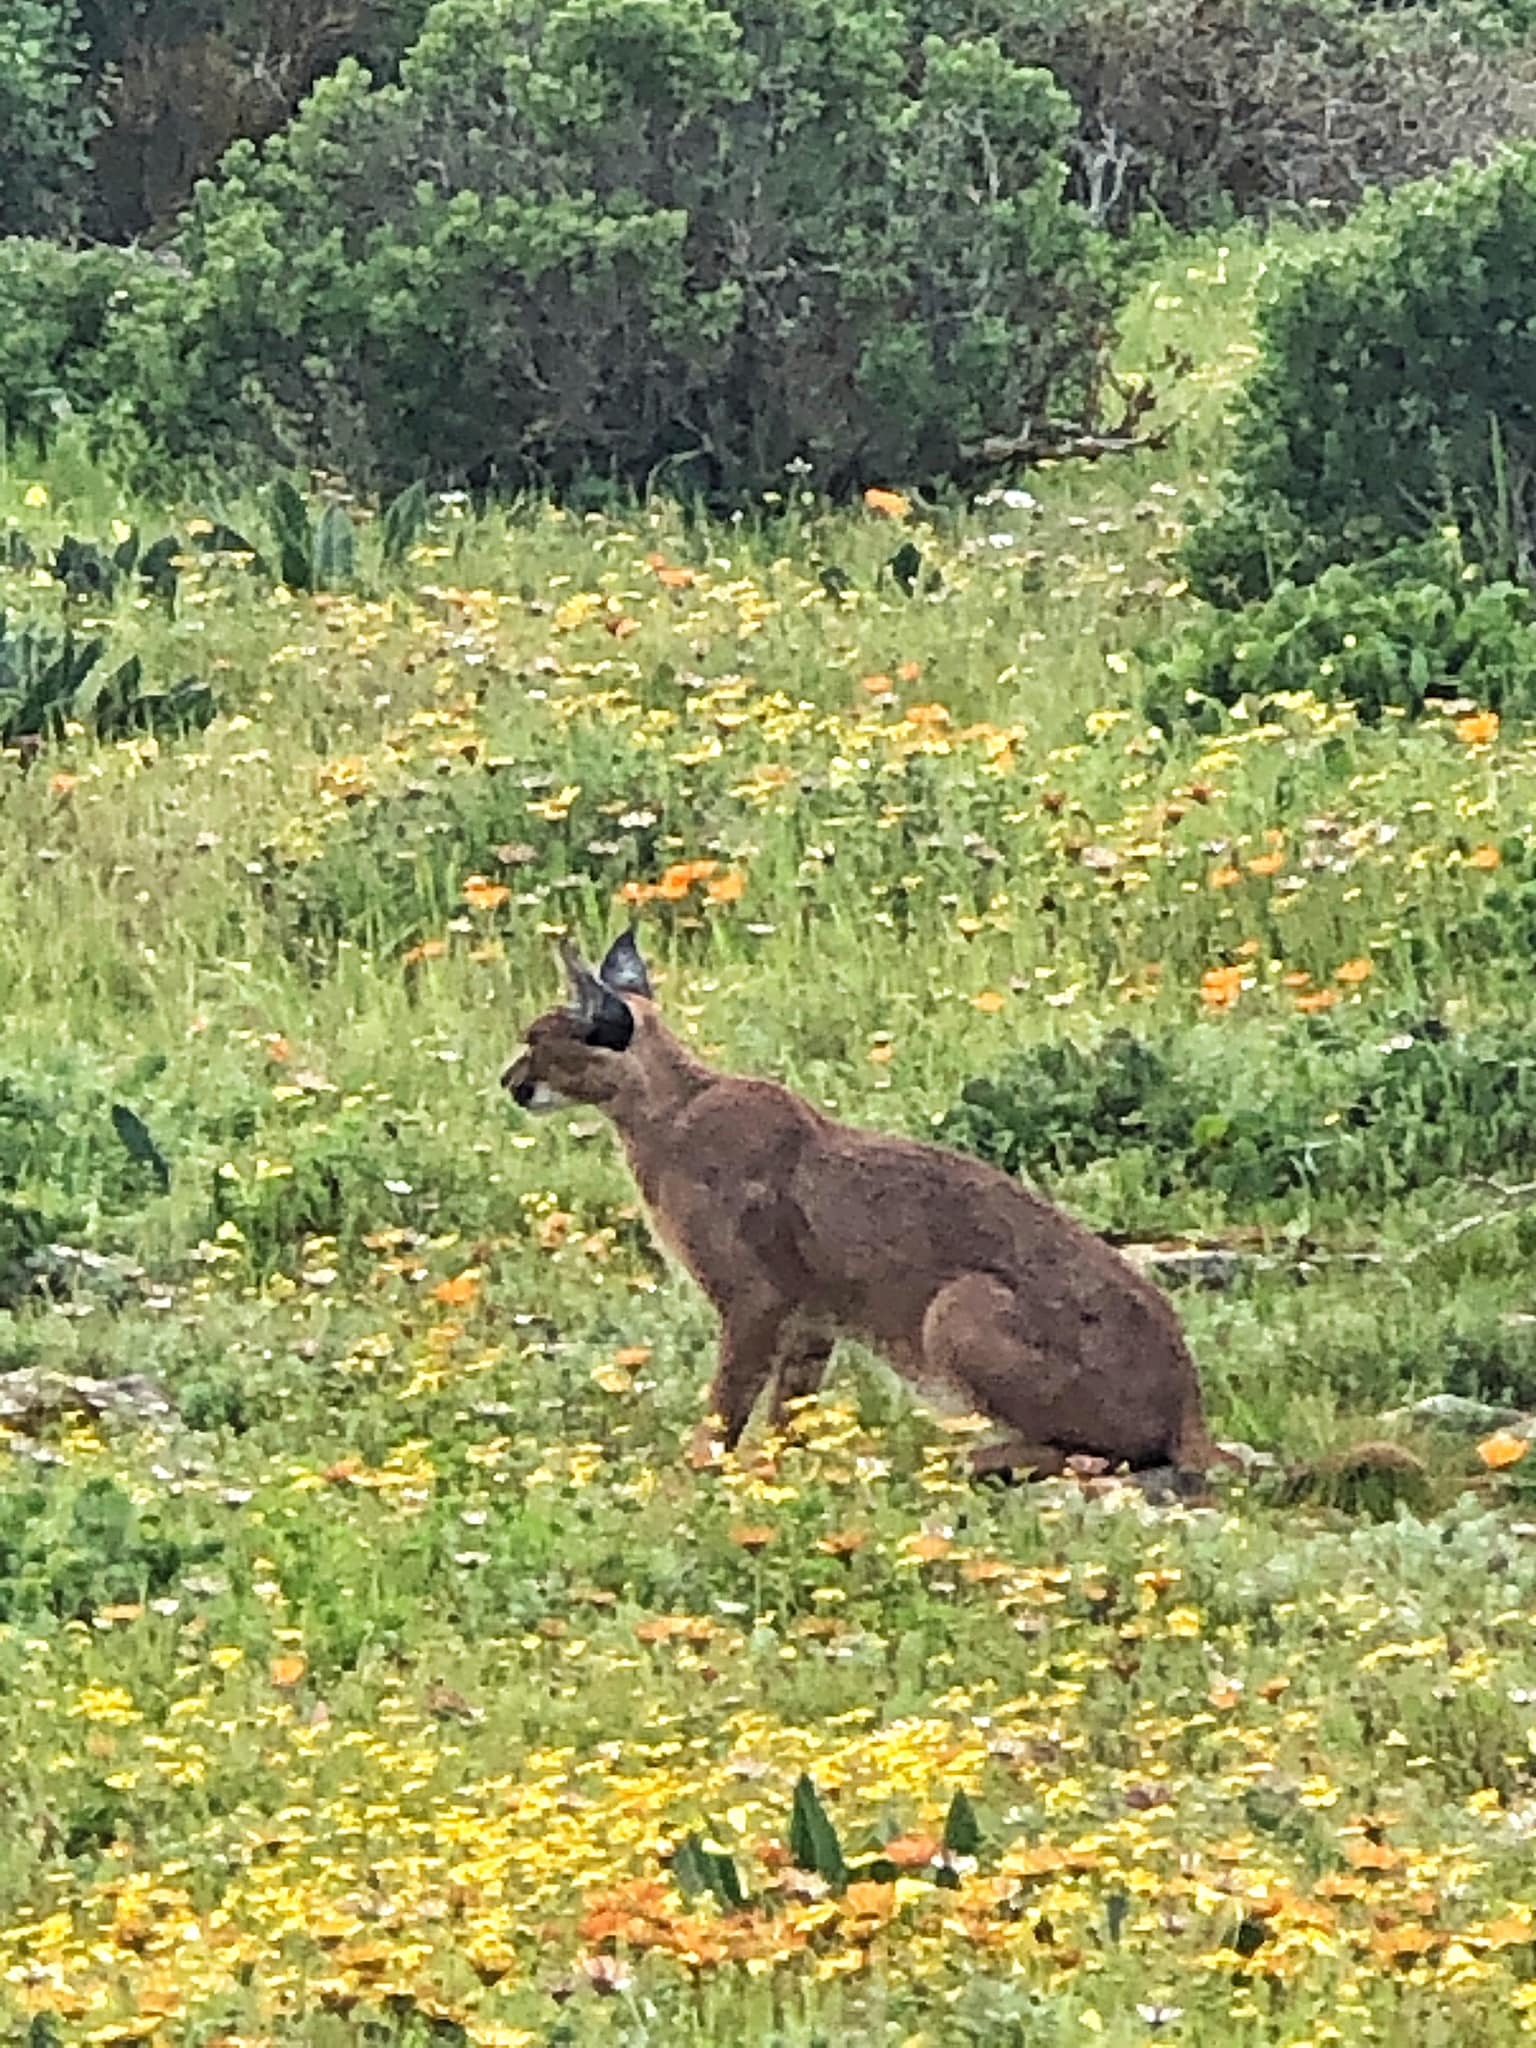 The perfect springtime sighting? A caracal in the wildflowers 